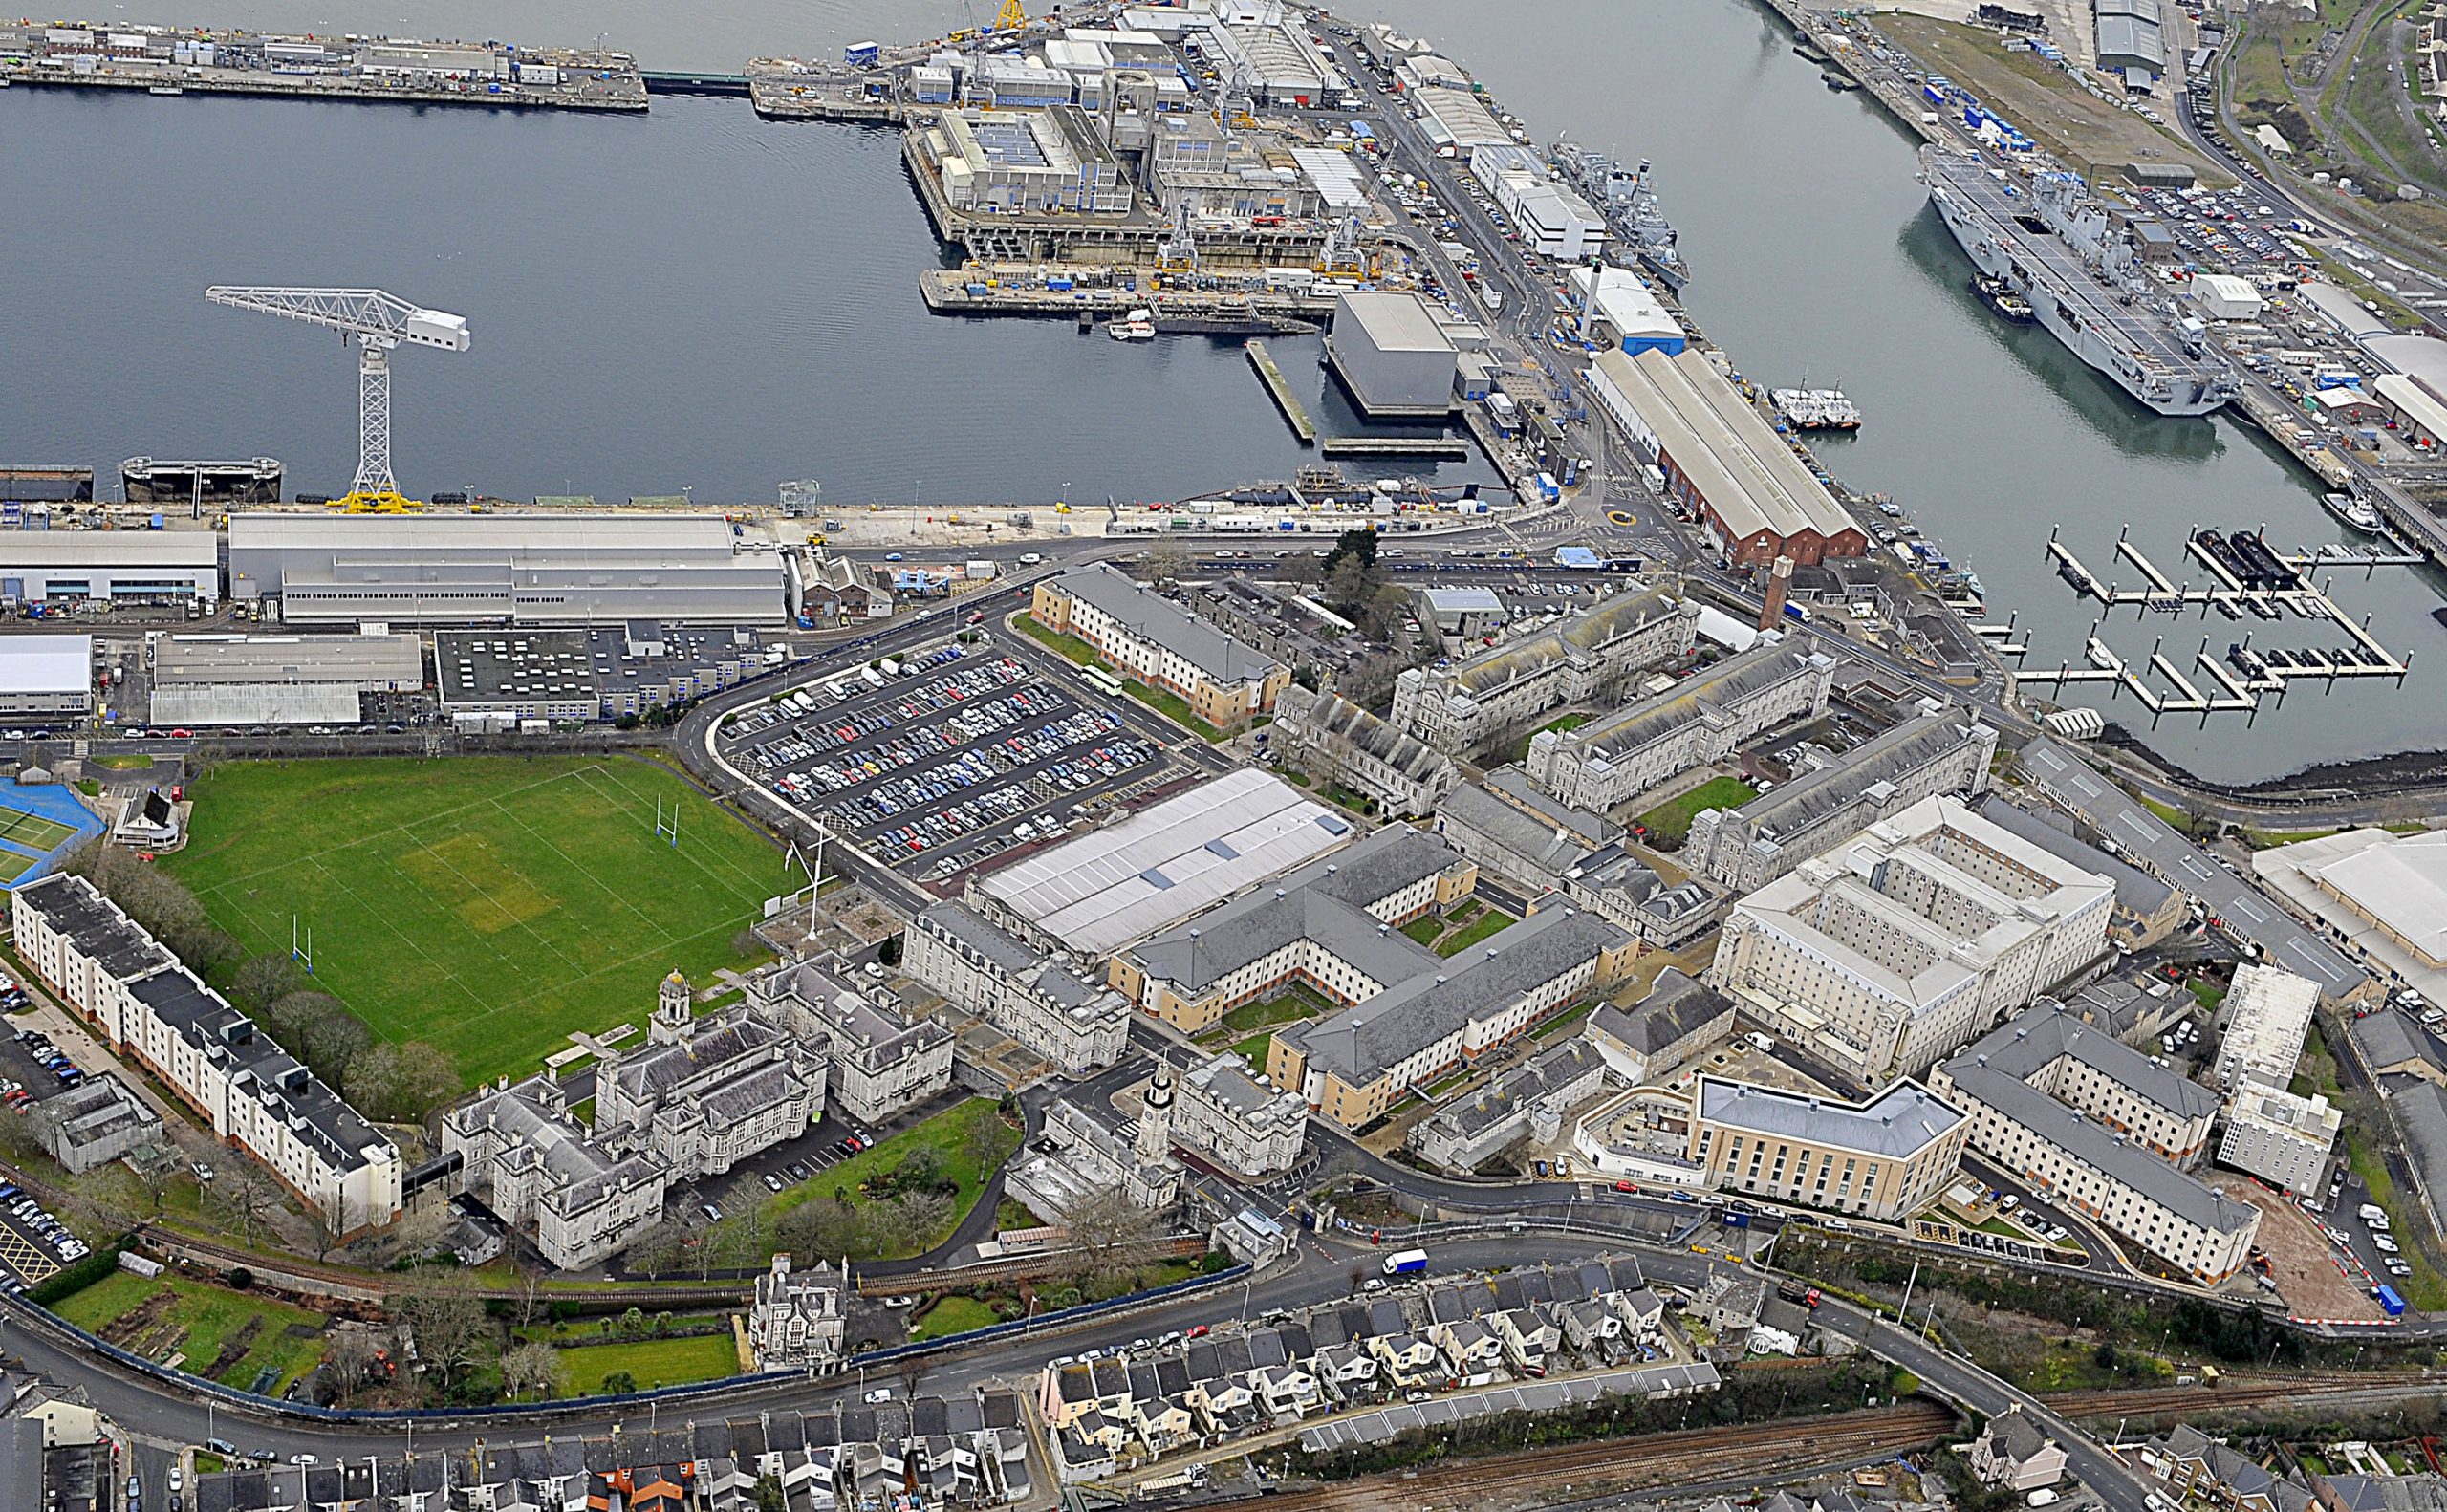 Arial view of Devonport Royal Dockyard, showing the nuclear licensed site at the top of frame. Credit - OGL